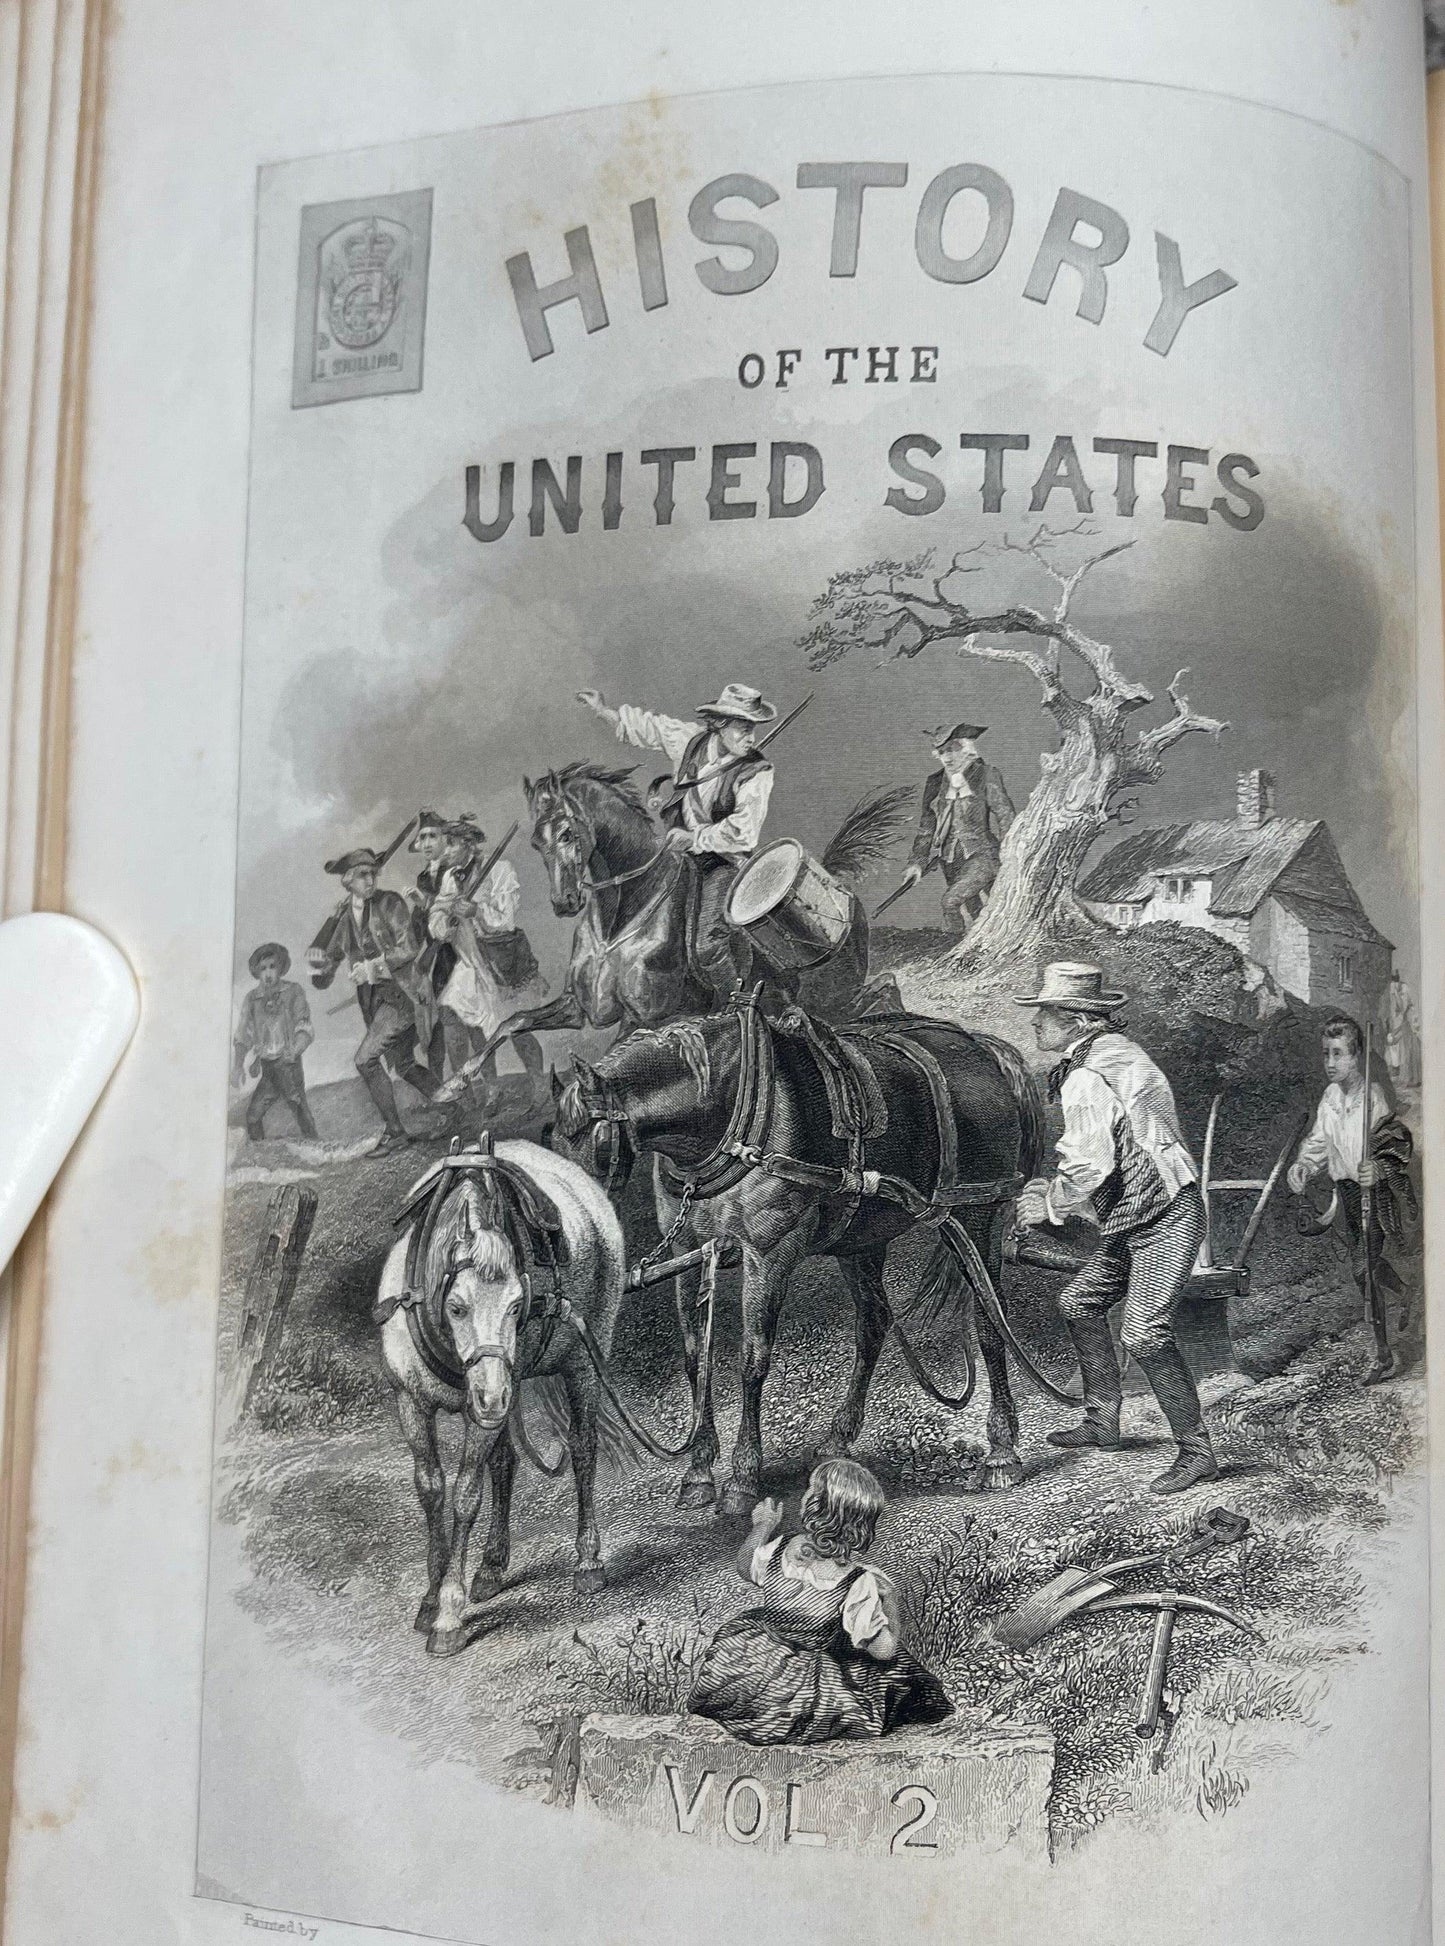 History of the United States from the Earliest Period to the Present Time / 1859 - Precious Cache